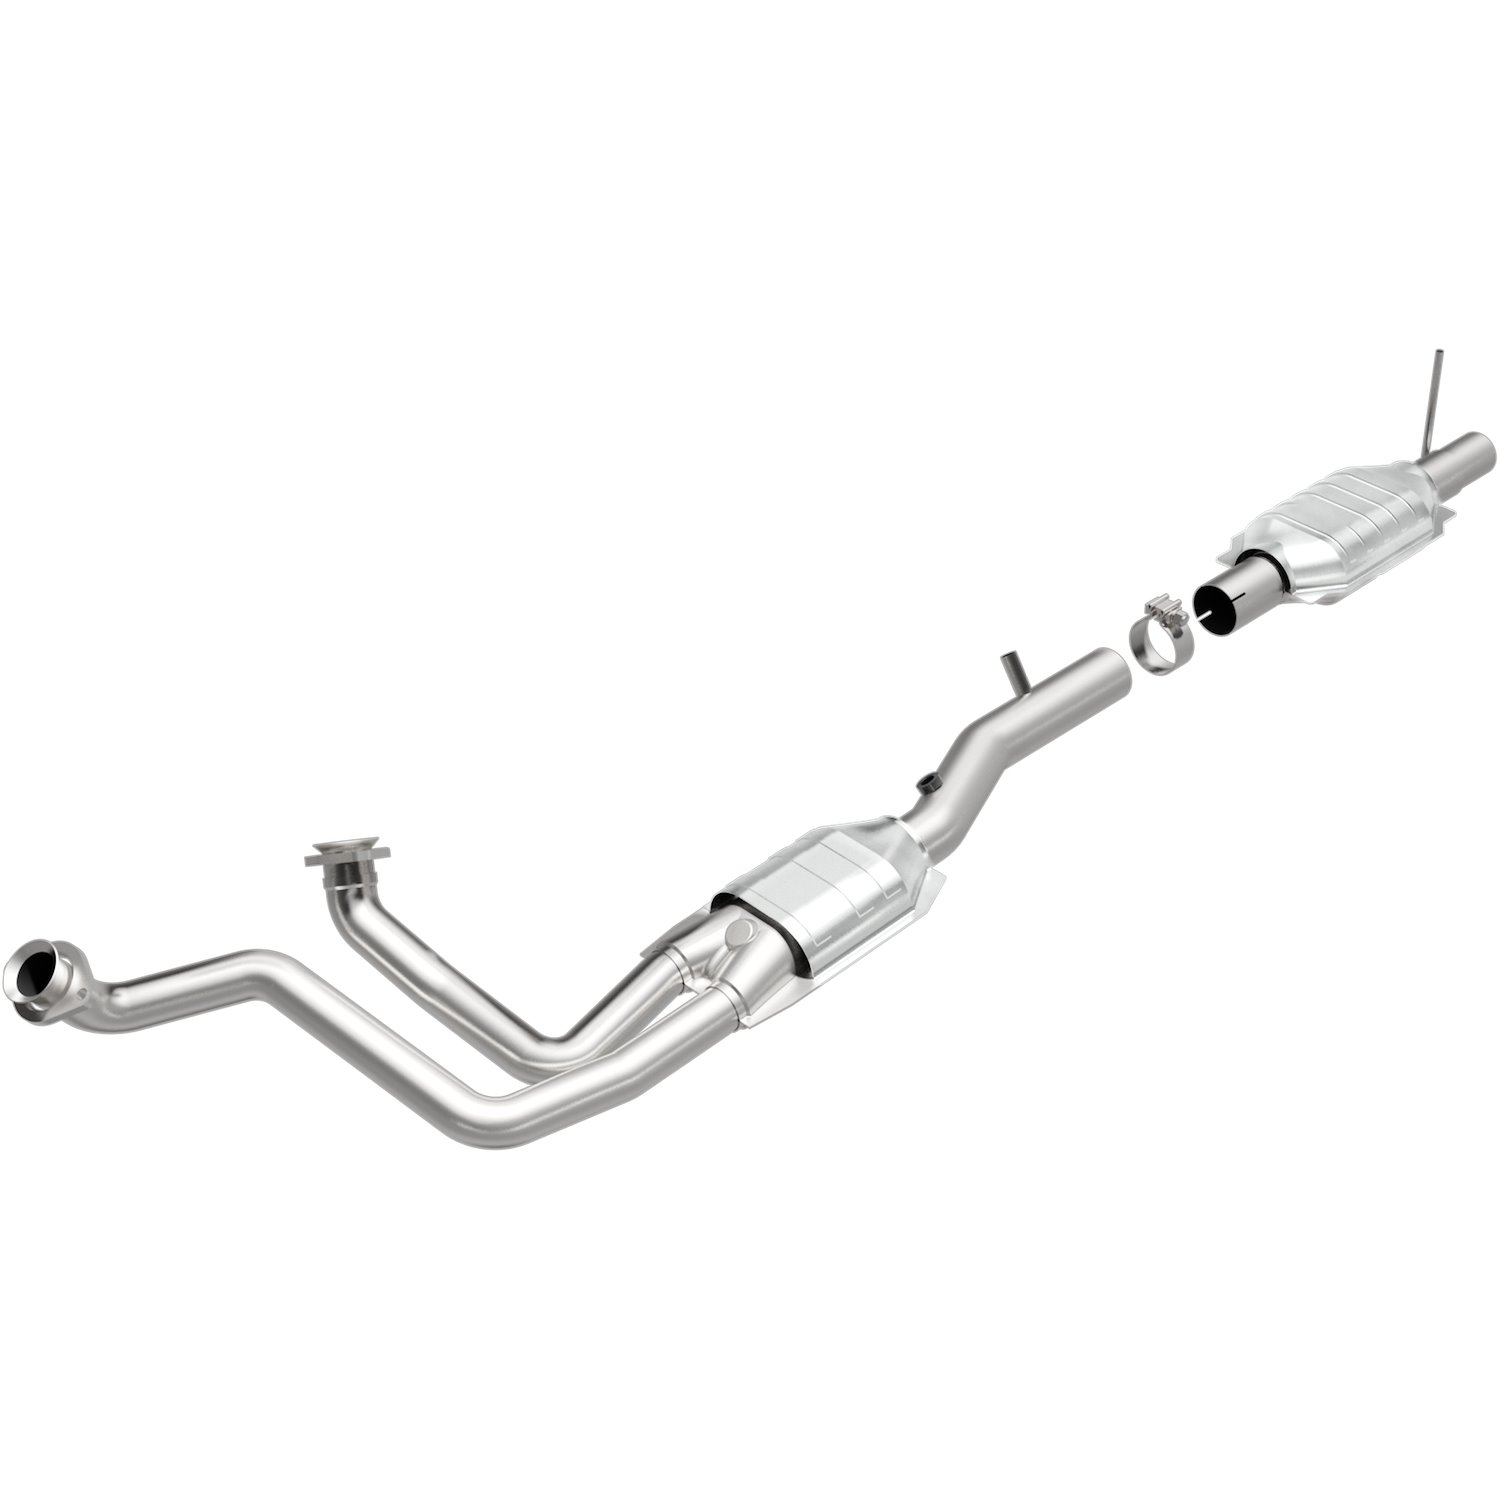 HM Grade Federal / EPA Compliant Direct-Fit Catalytic Converter 93190